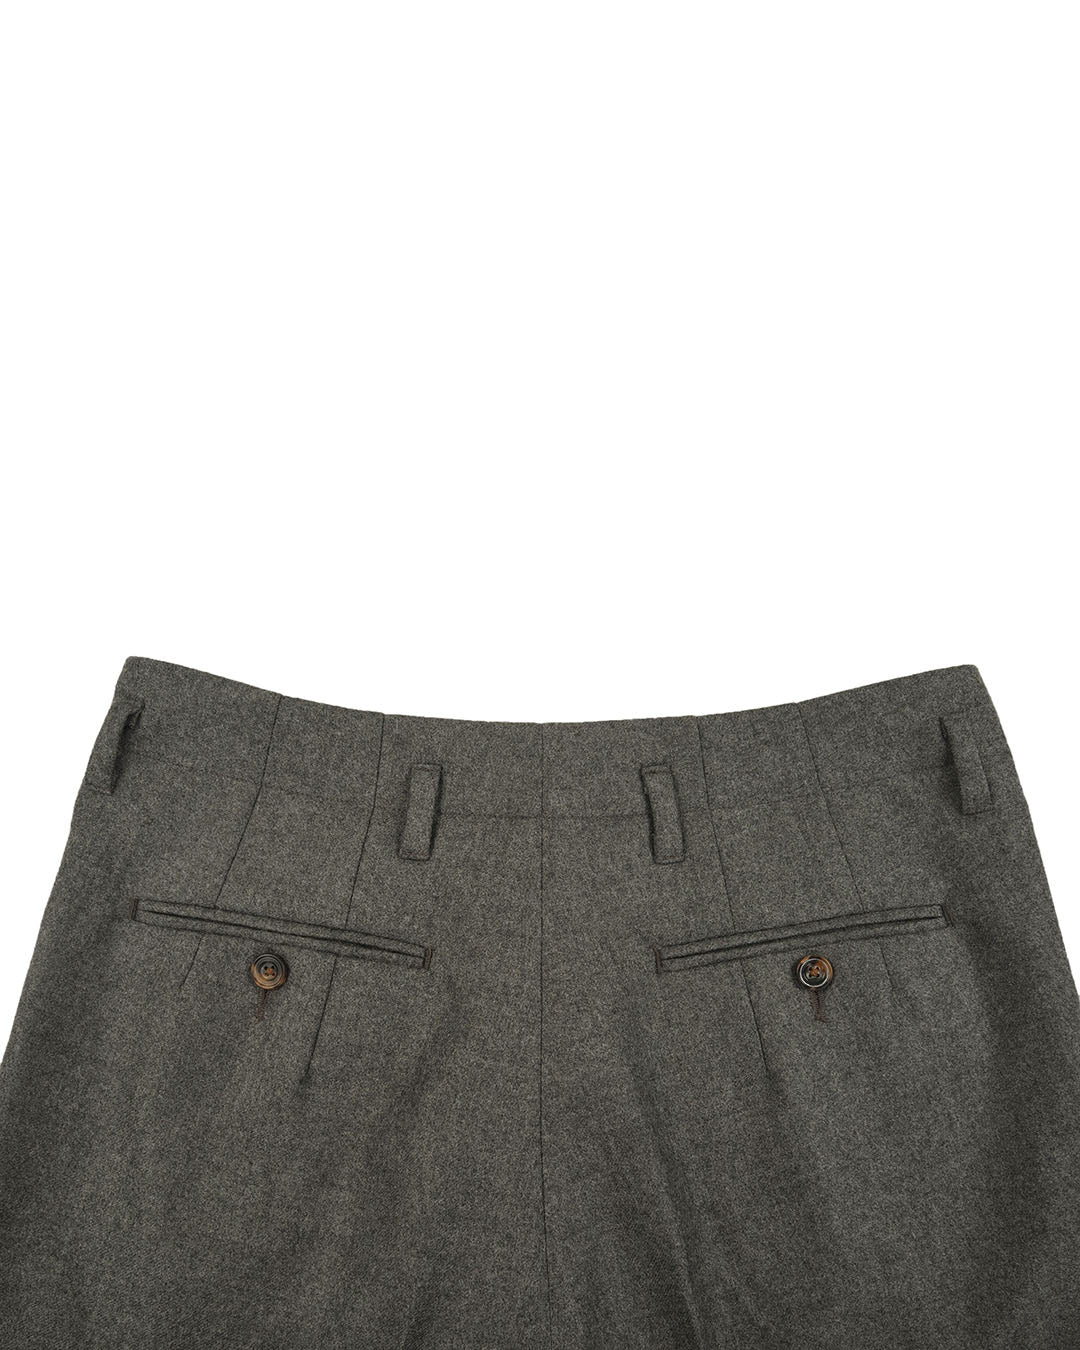 Minnis Flannel: Grey Worsted Pants